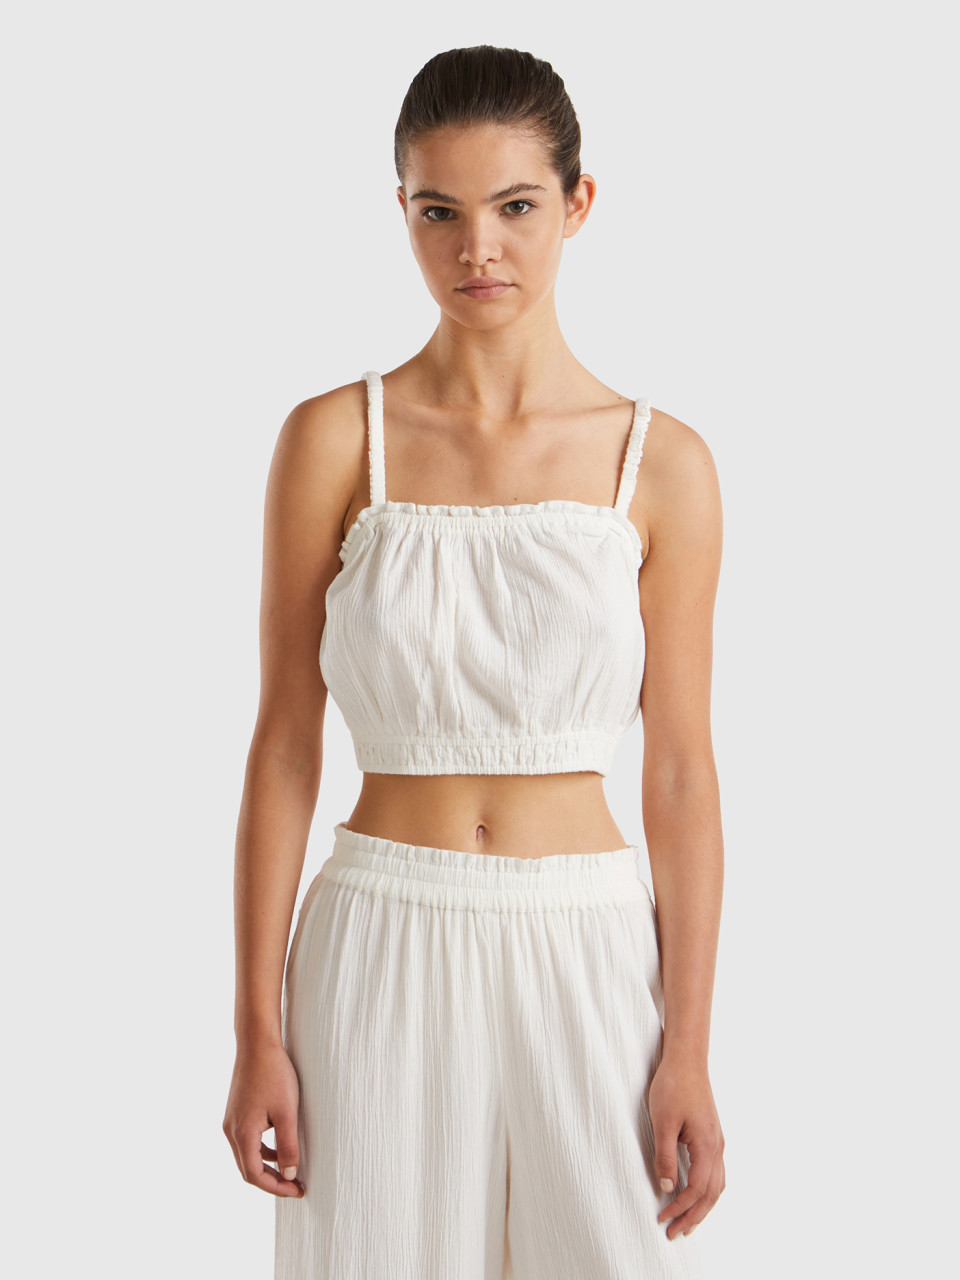 Benetton, Top Cropped 100% Cotone, Bianco Panna, Donna